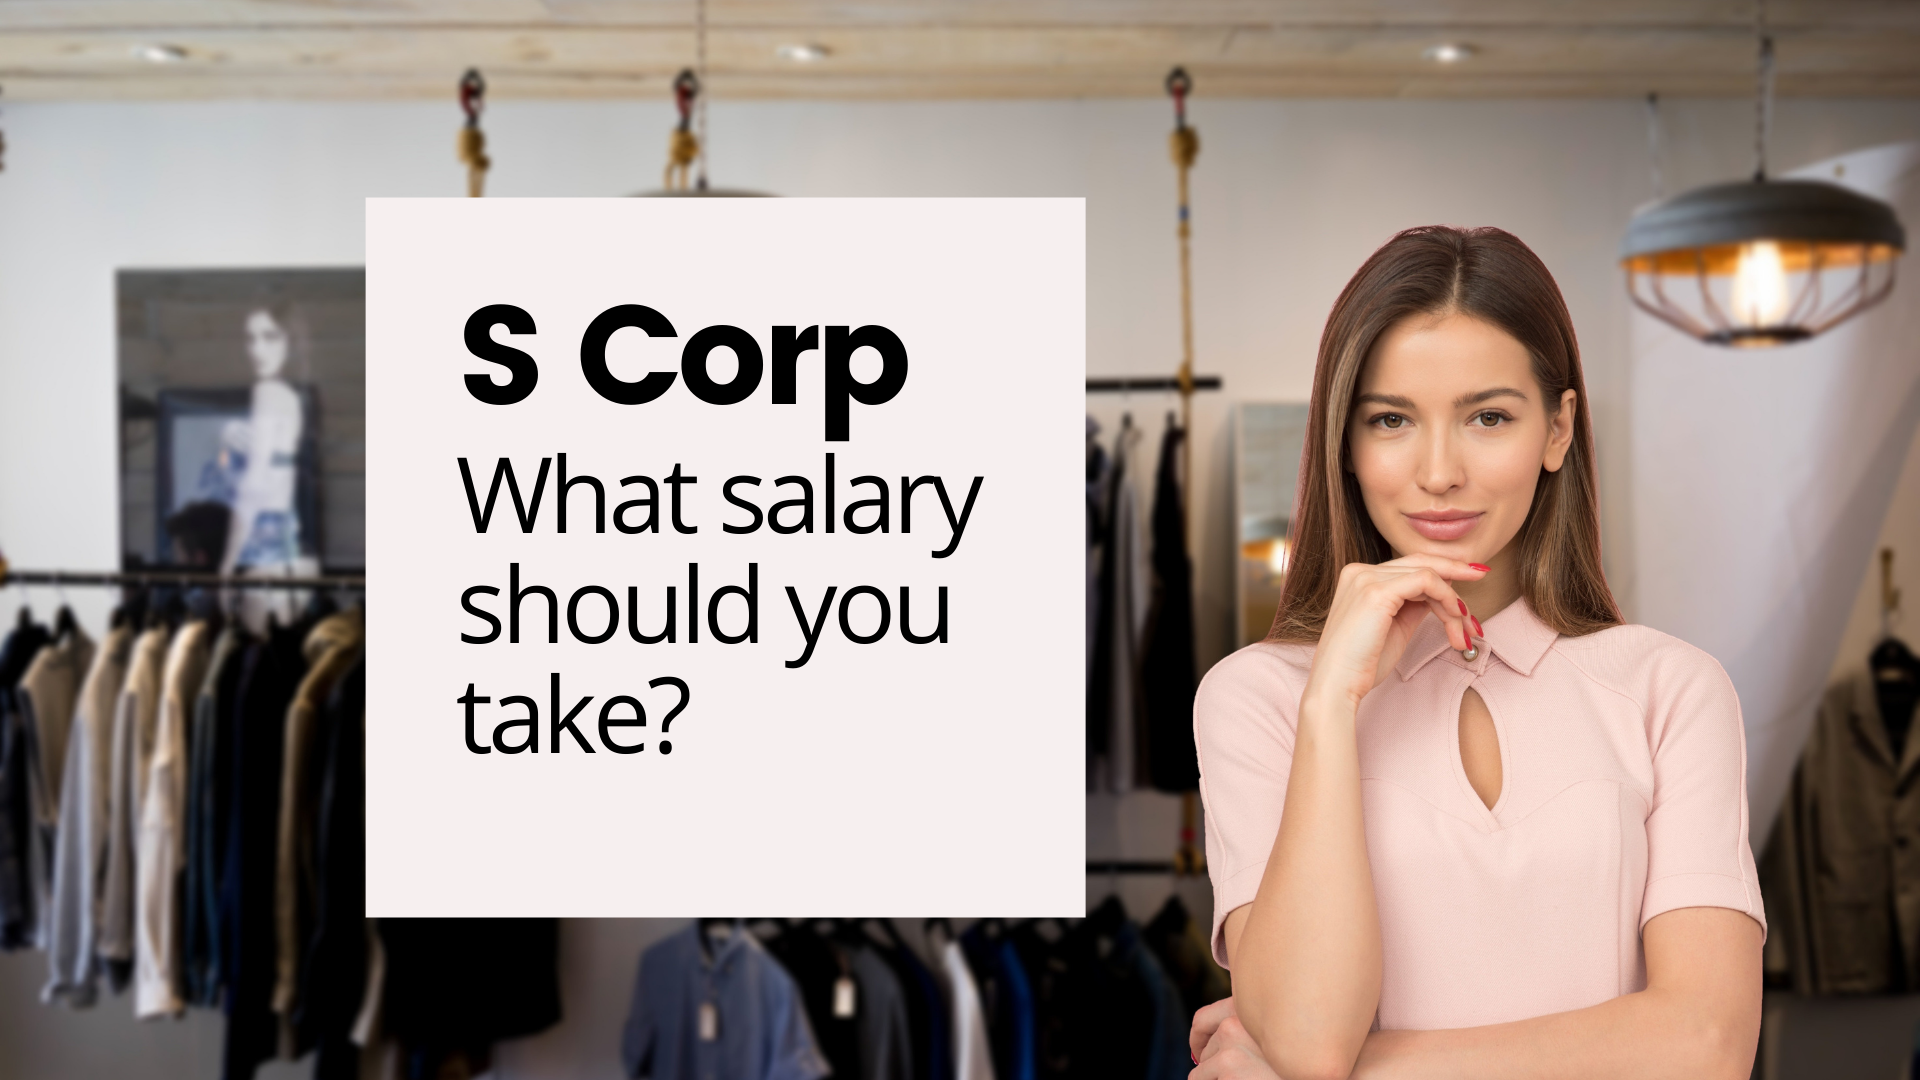 S corp: What salary should you take as the business owner?